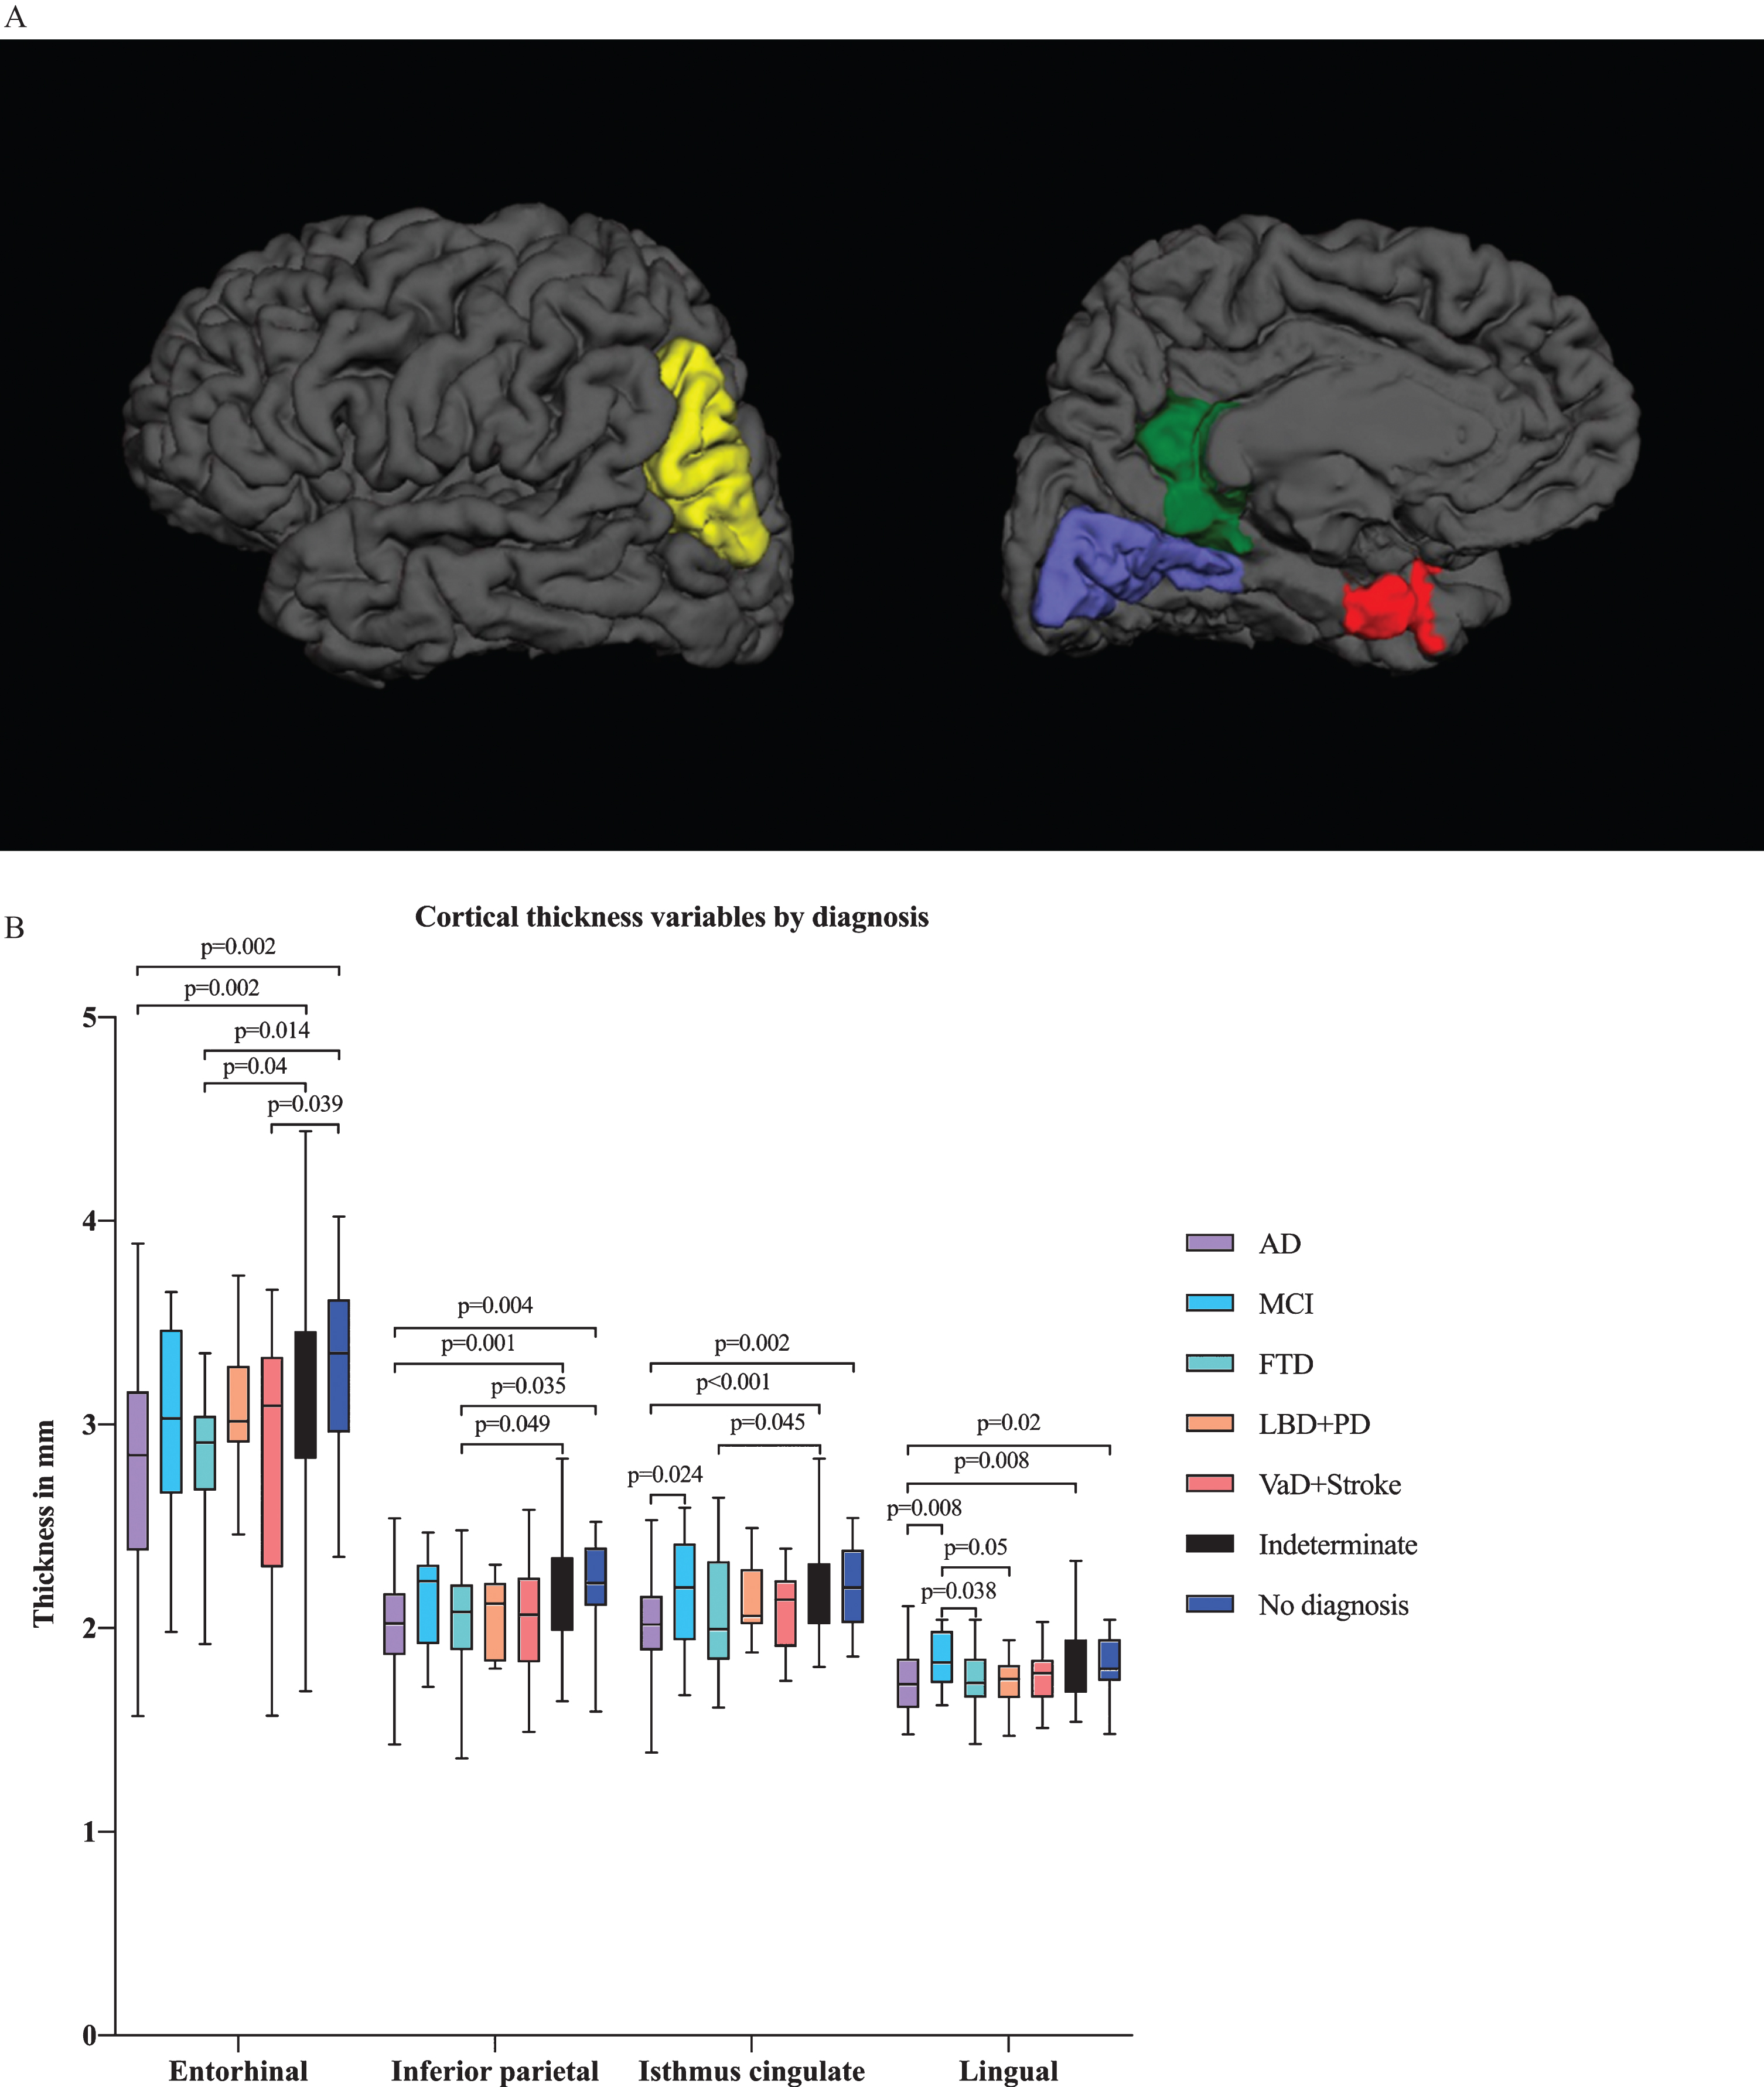 A) Illustration of cortical thickness regions of interest (ROIs) from the ANCOVA model by diagnostic group from lateral and medial views. The ANCOVA model by clinical diagnosis resulted in ROIs including entorhinal, lingual, inferior parietal and isthmus cingulate cortical thicknesses. Red refers to the entorhinal cortex, blue to the lingual cortex, green to the isthmus cingulate cortex and yellow to the inferior parietal cortex. B) Cortical thickness variables by diagnostic group. Only the p-values from significant comparisons are shown.